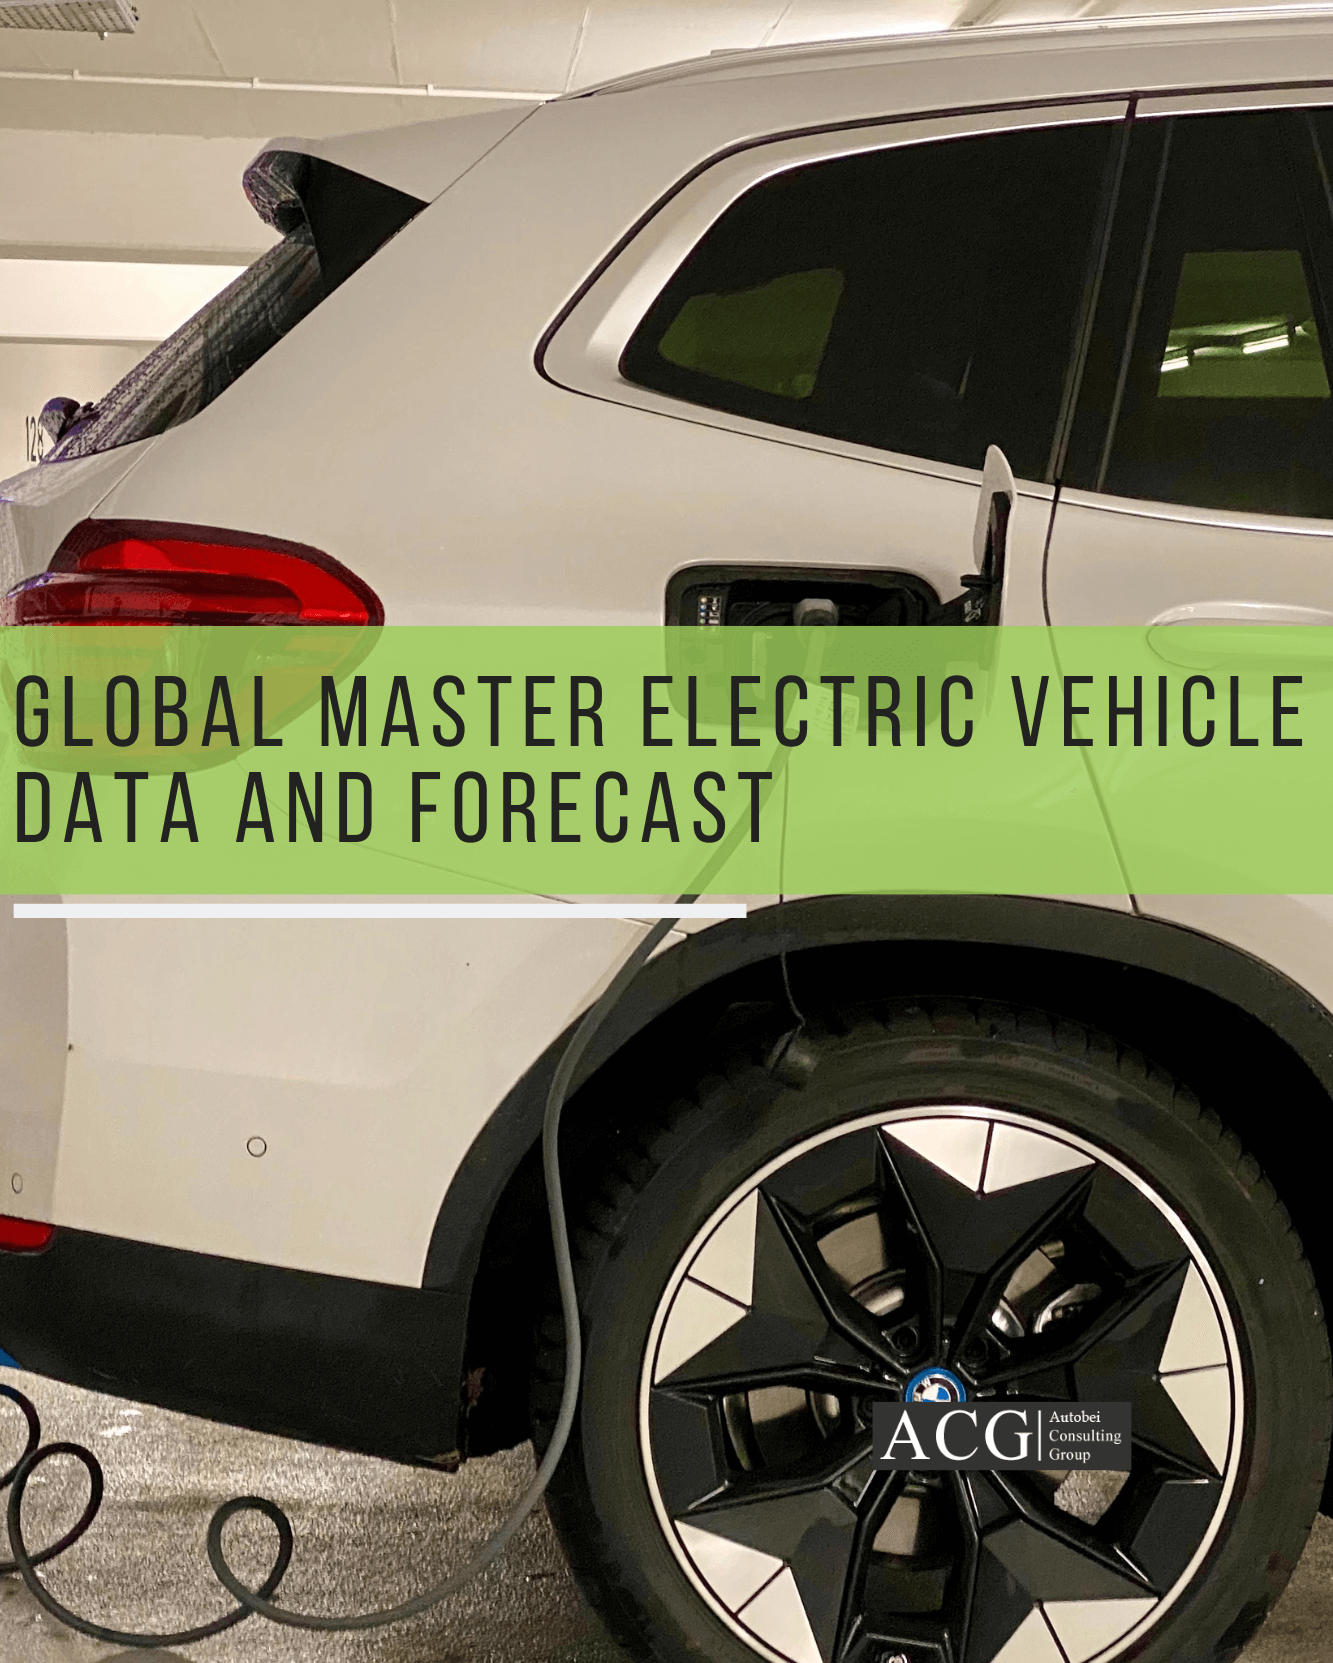 Global Master Electric Vehicle Data and Forecast